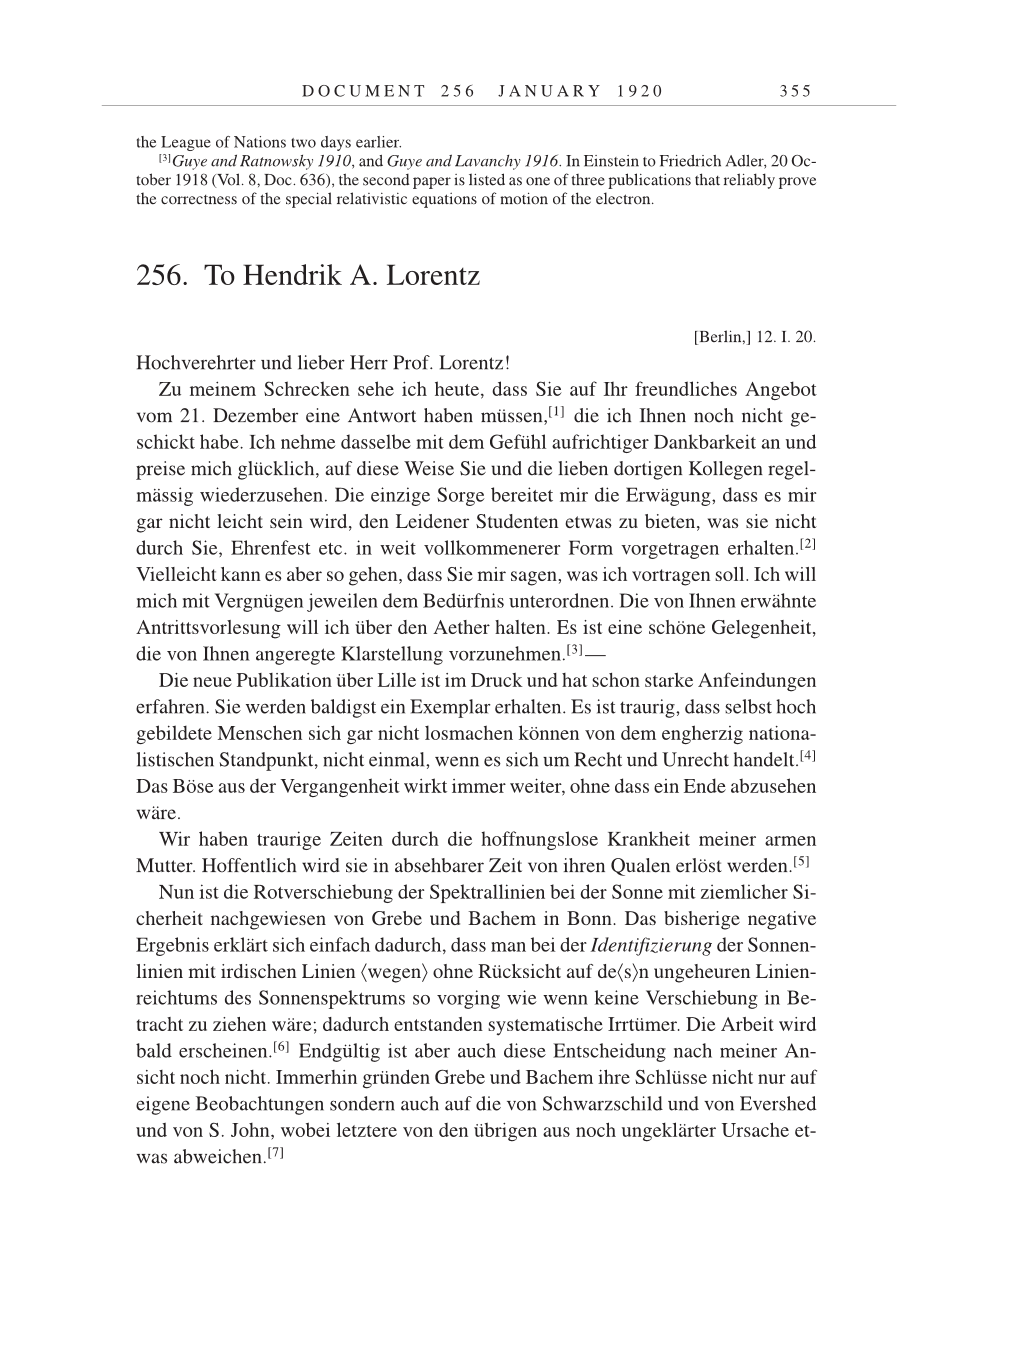 Volume 9: The Berlin Years: Correspondence January 1919-April 1920 page 355